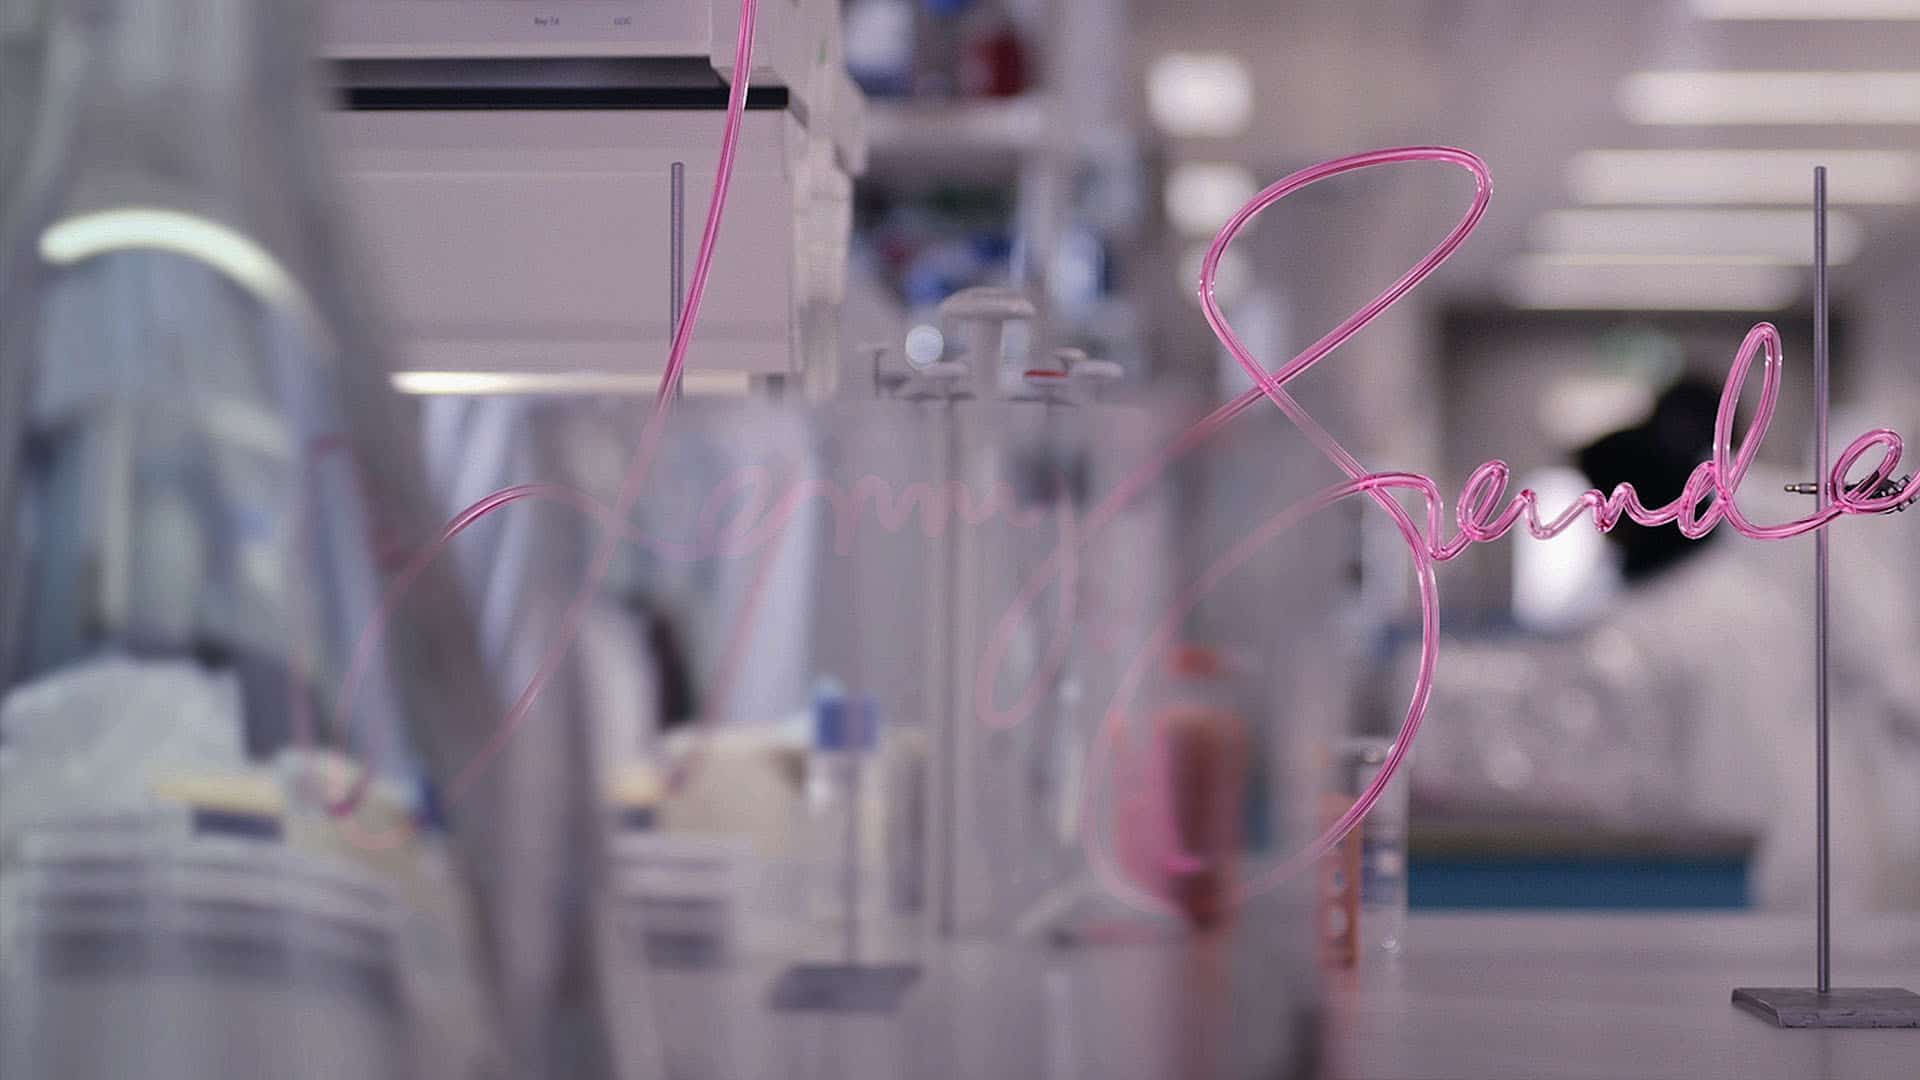 Cancer Research TV advert